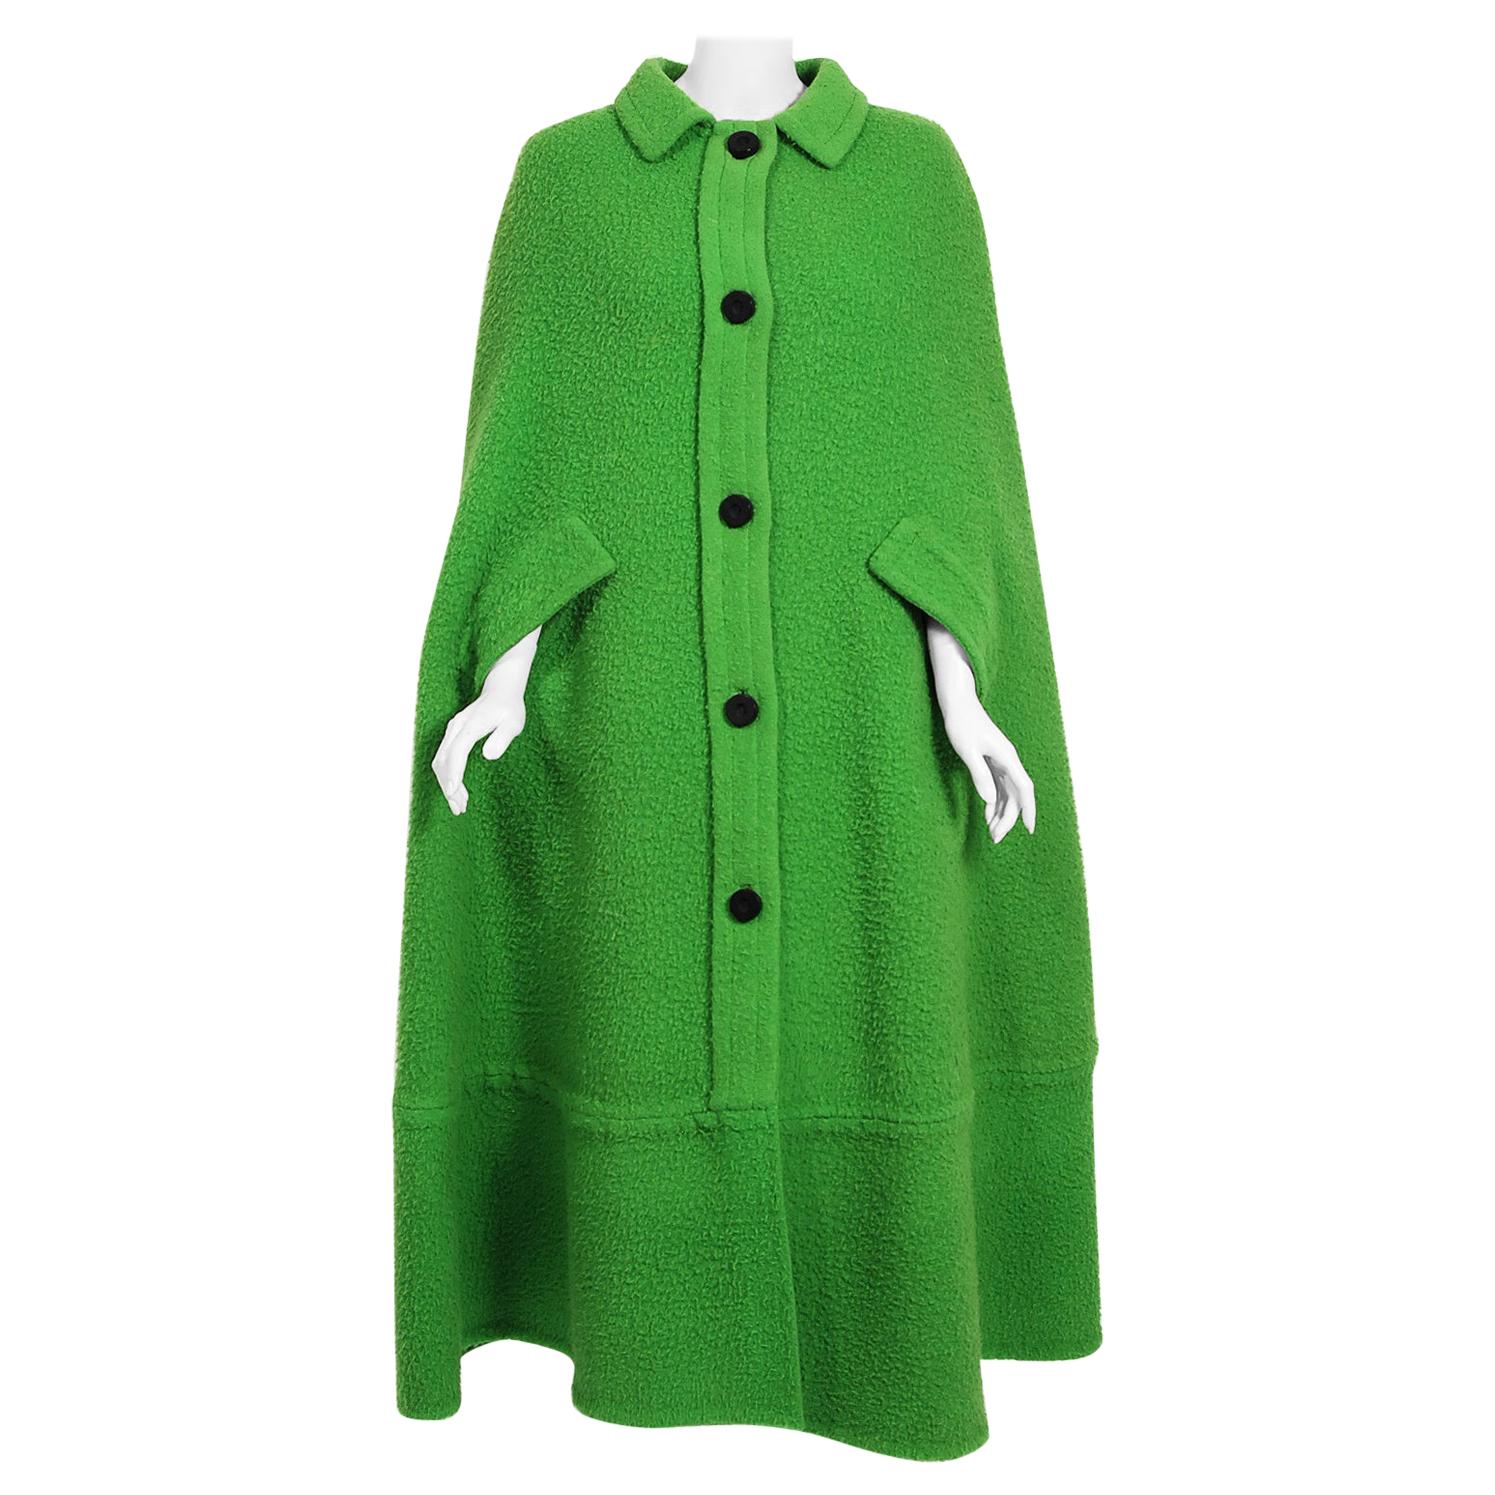 Vintage 1966 Christian Dior Haute-Couture Documented Green Wool Full-Length Cape